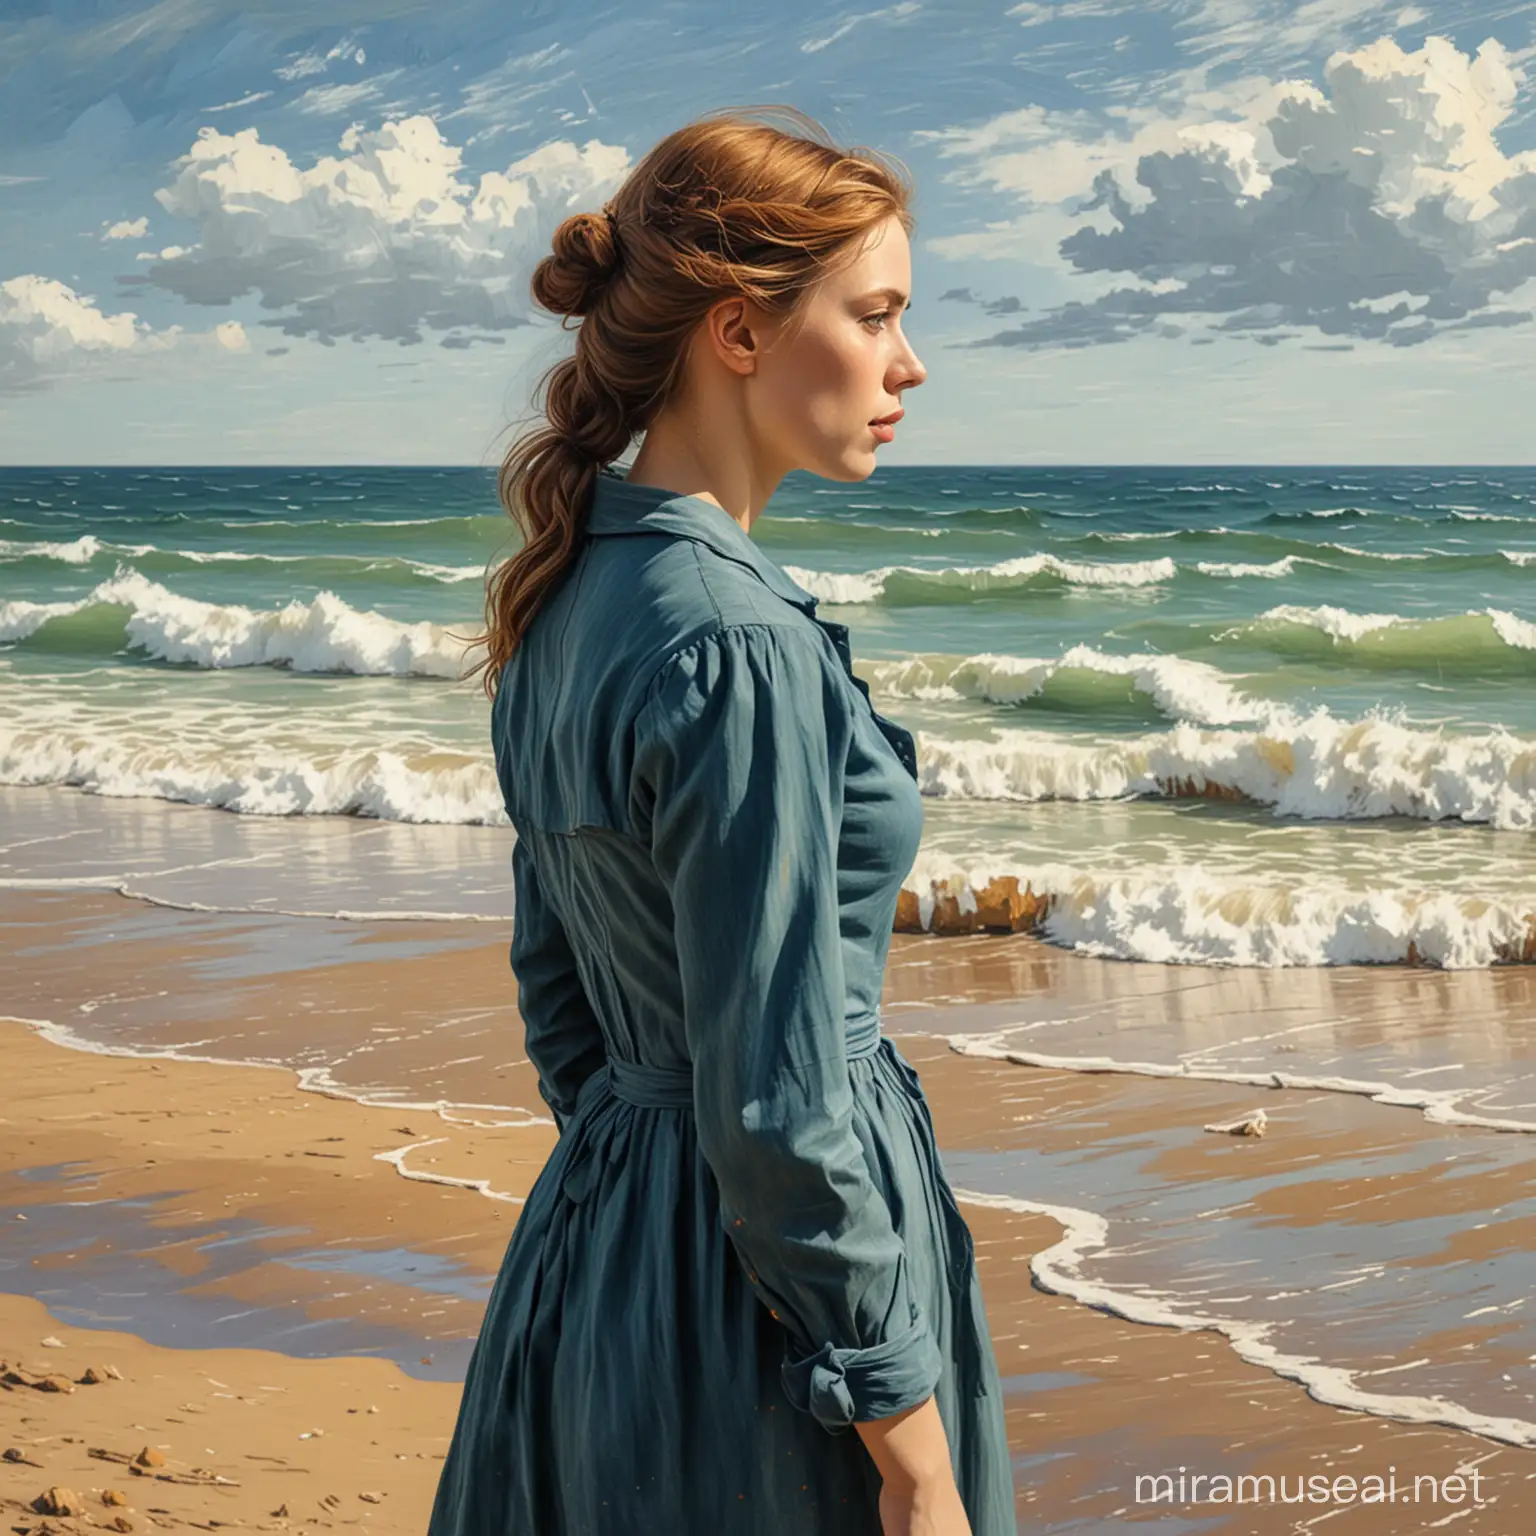 painting in style of Van Gogh of young woman on beach looking wistfully out to sea 
